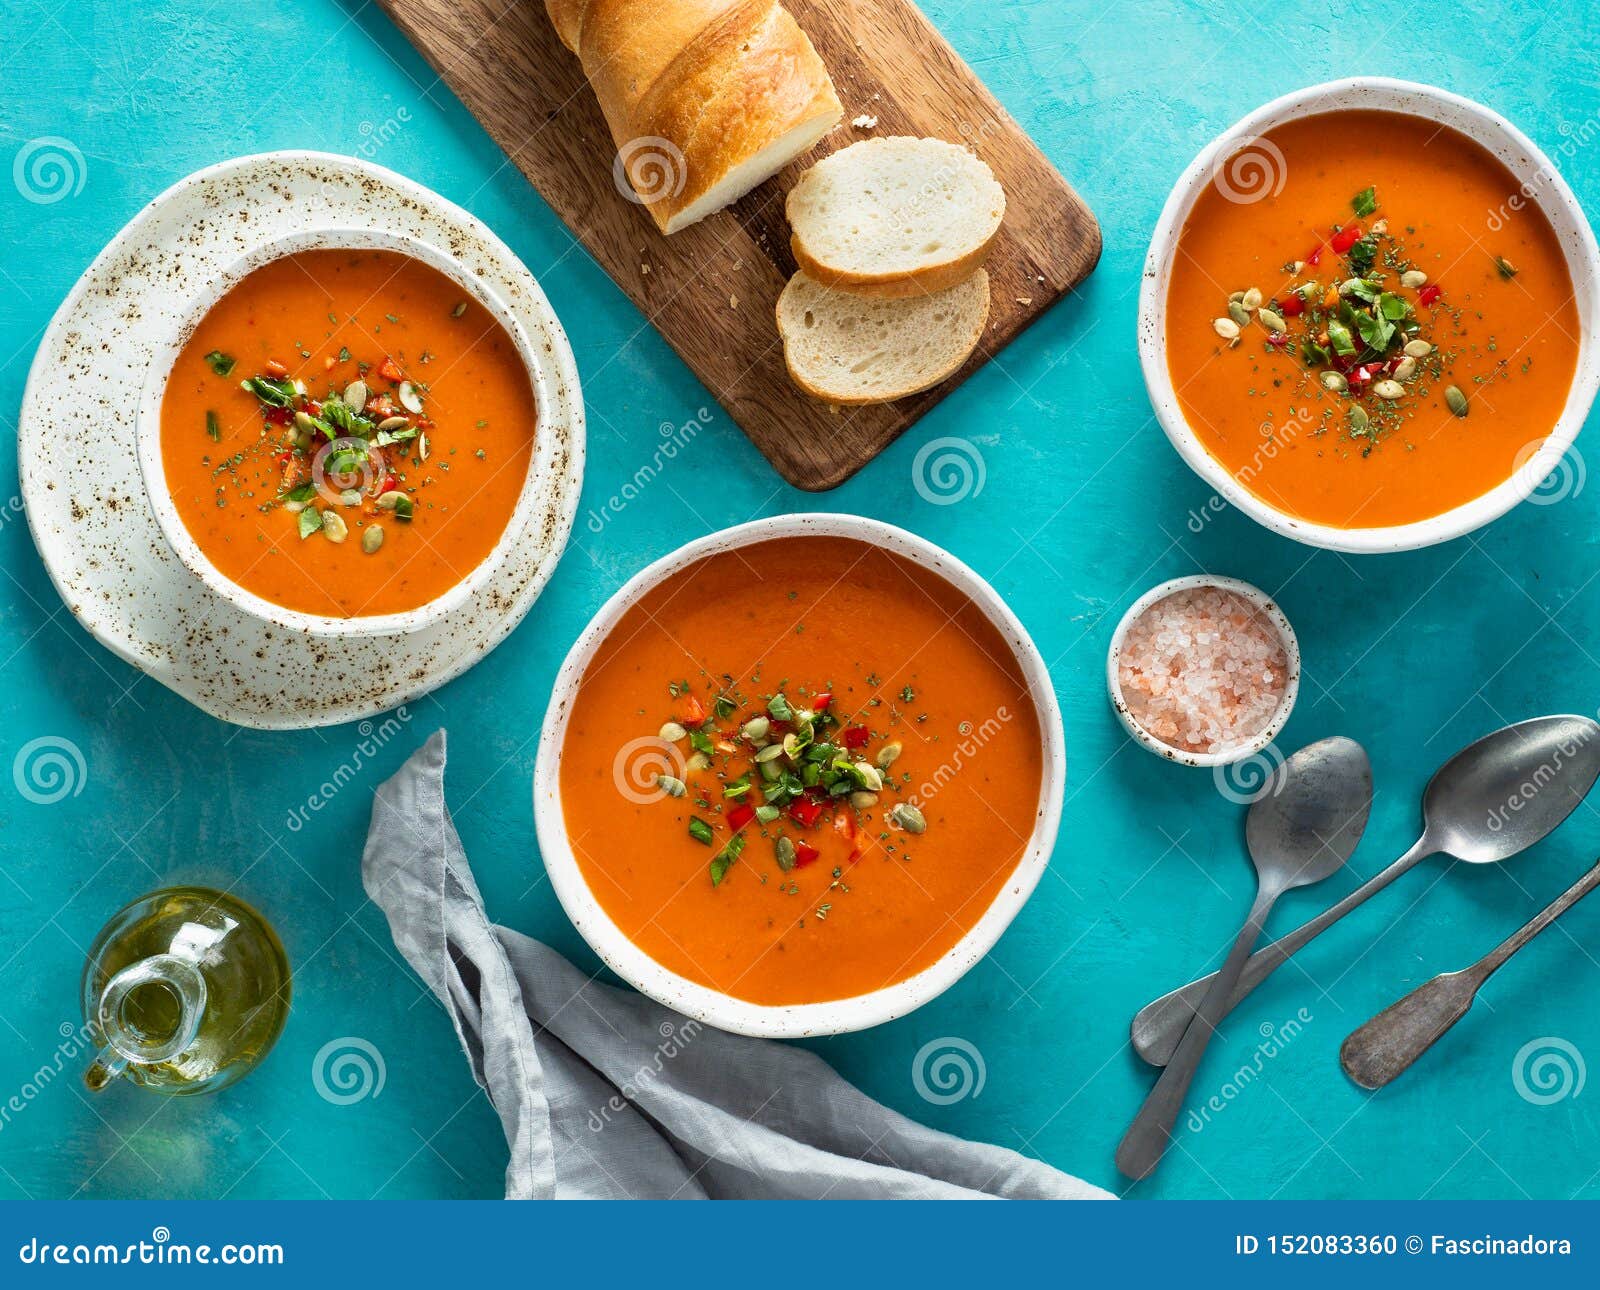 Gaspacho Soup on Blue, Top View Stock Photo - Image of mashed, plate ...